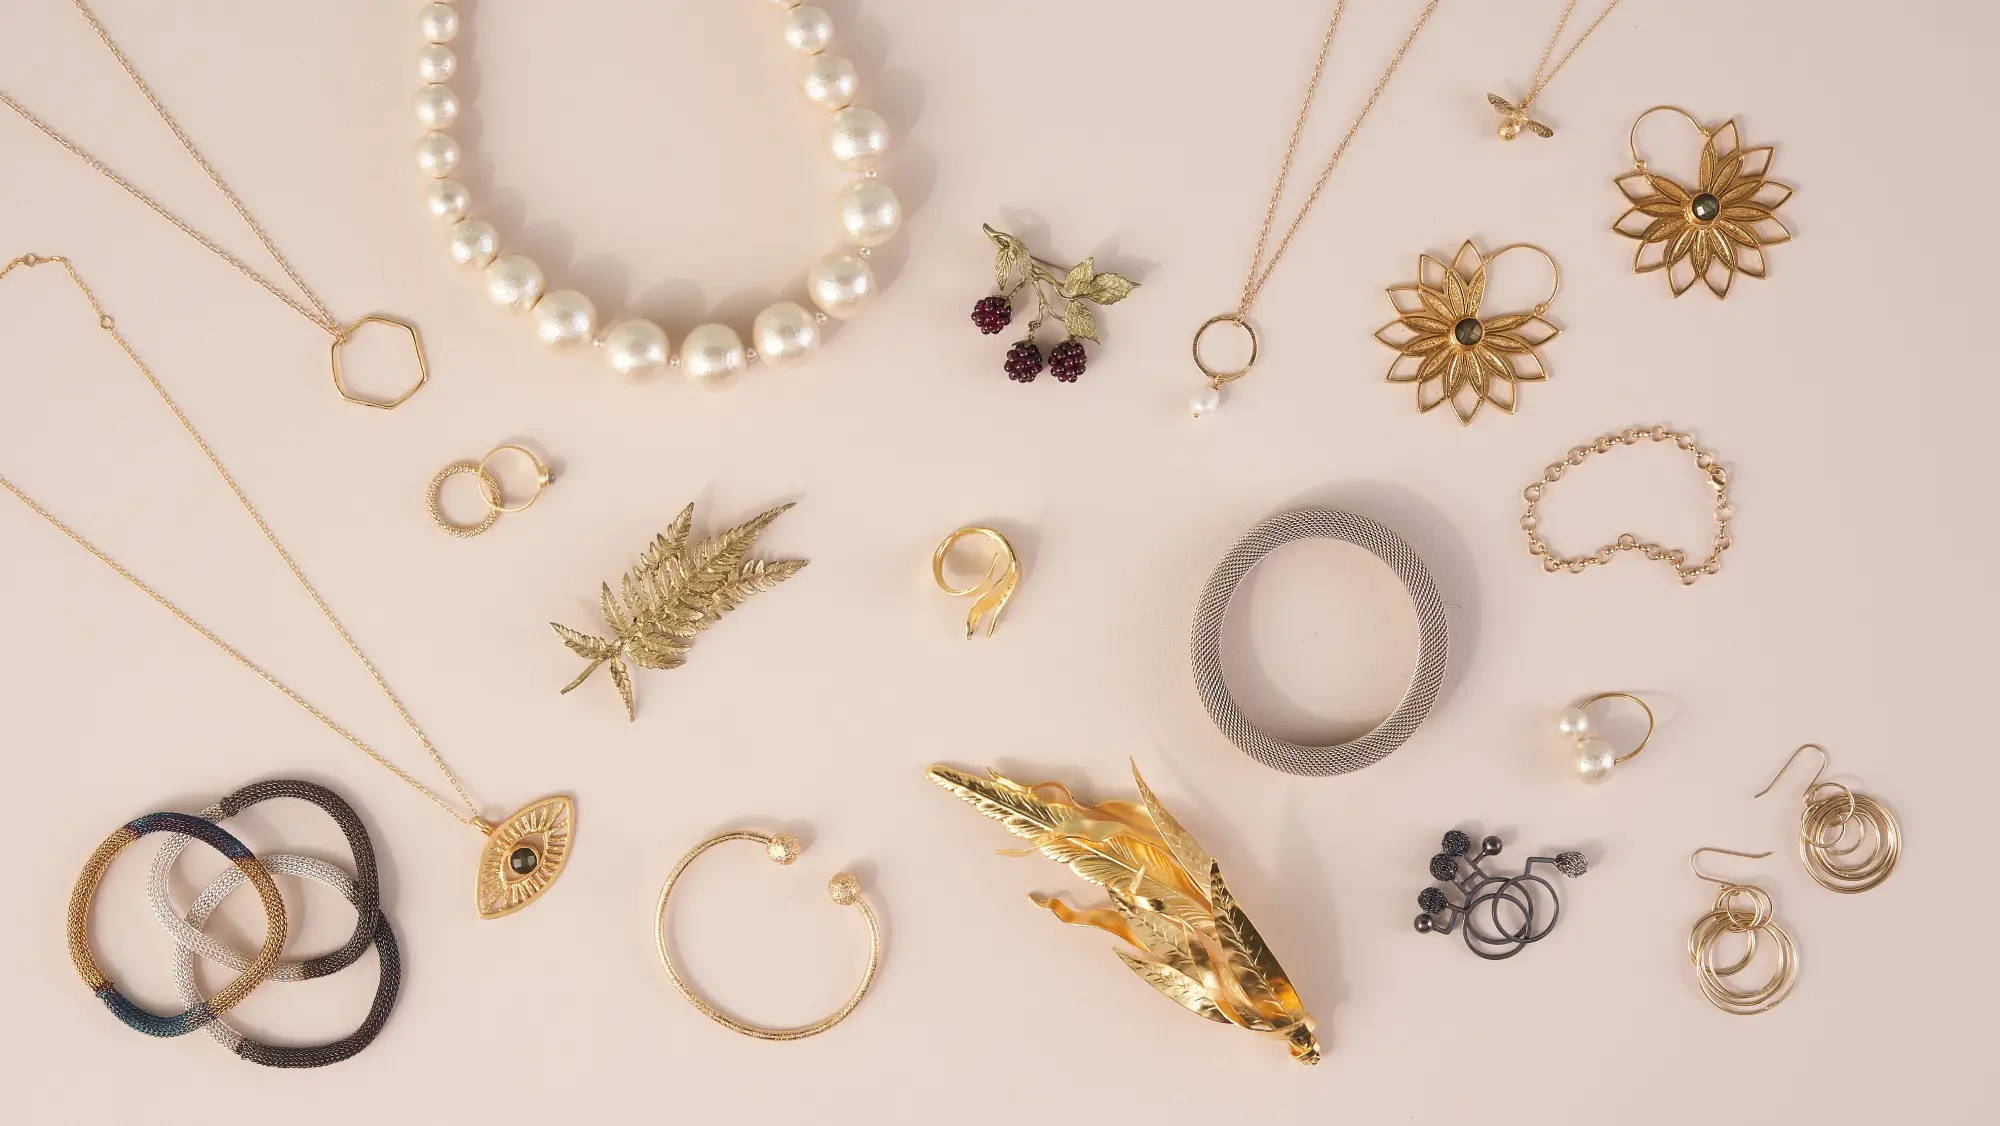 Shop designer necklaces, bracelets, earrings, brooches and rings at the V&A Shop